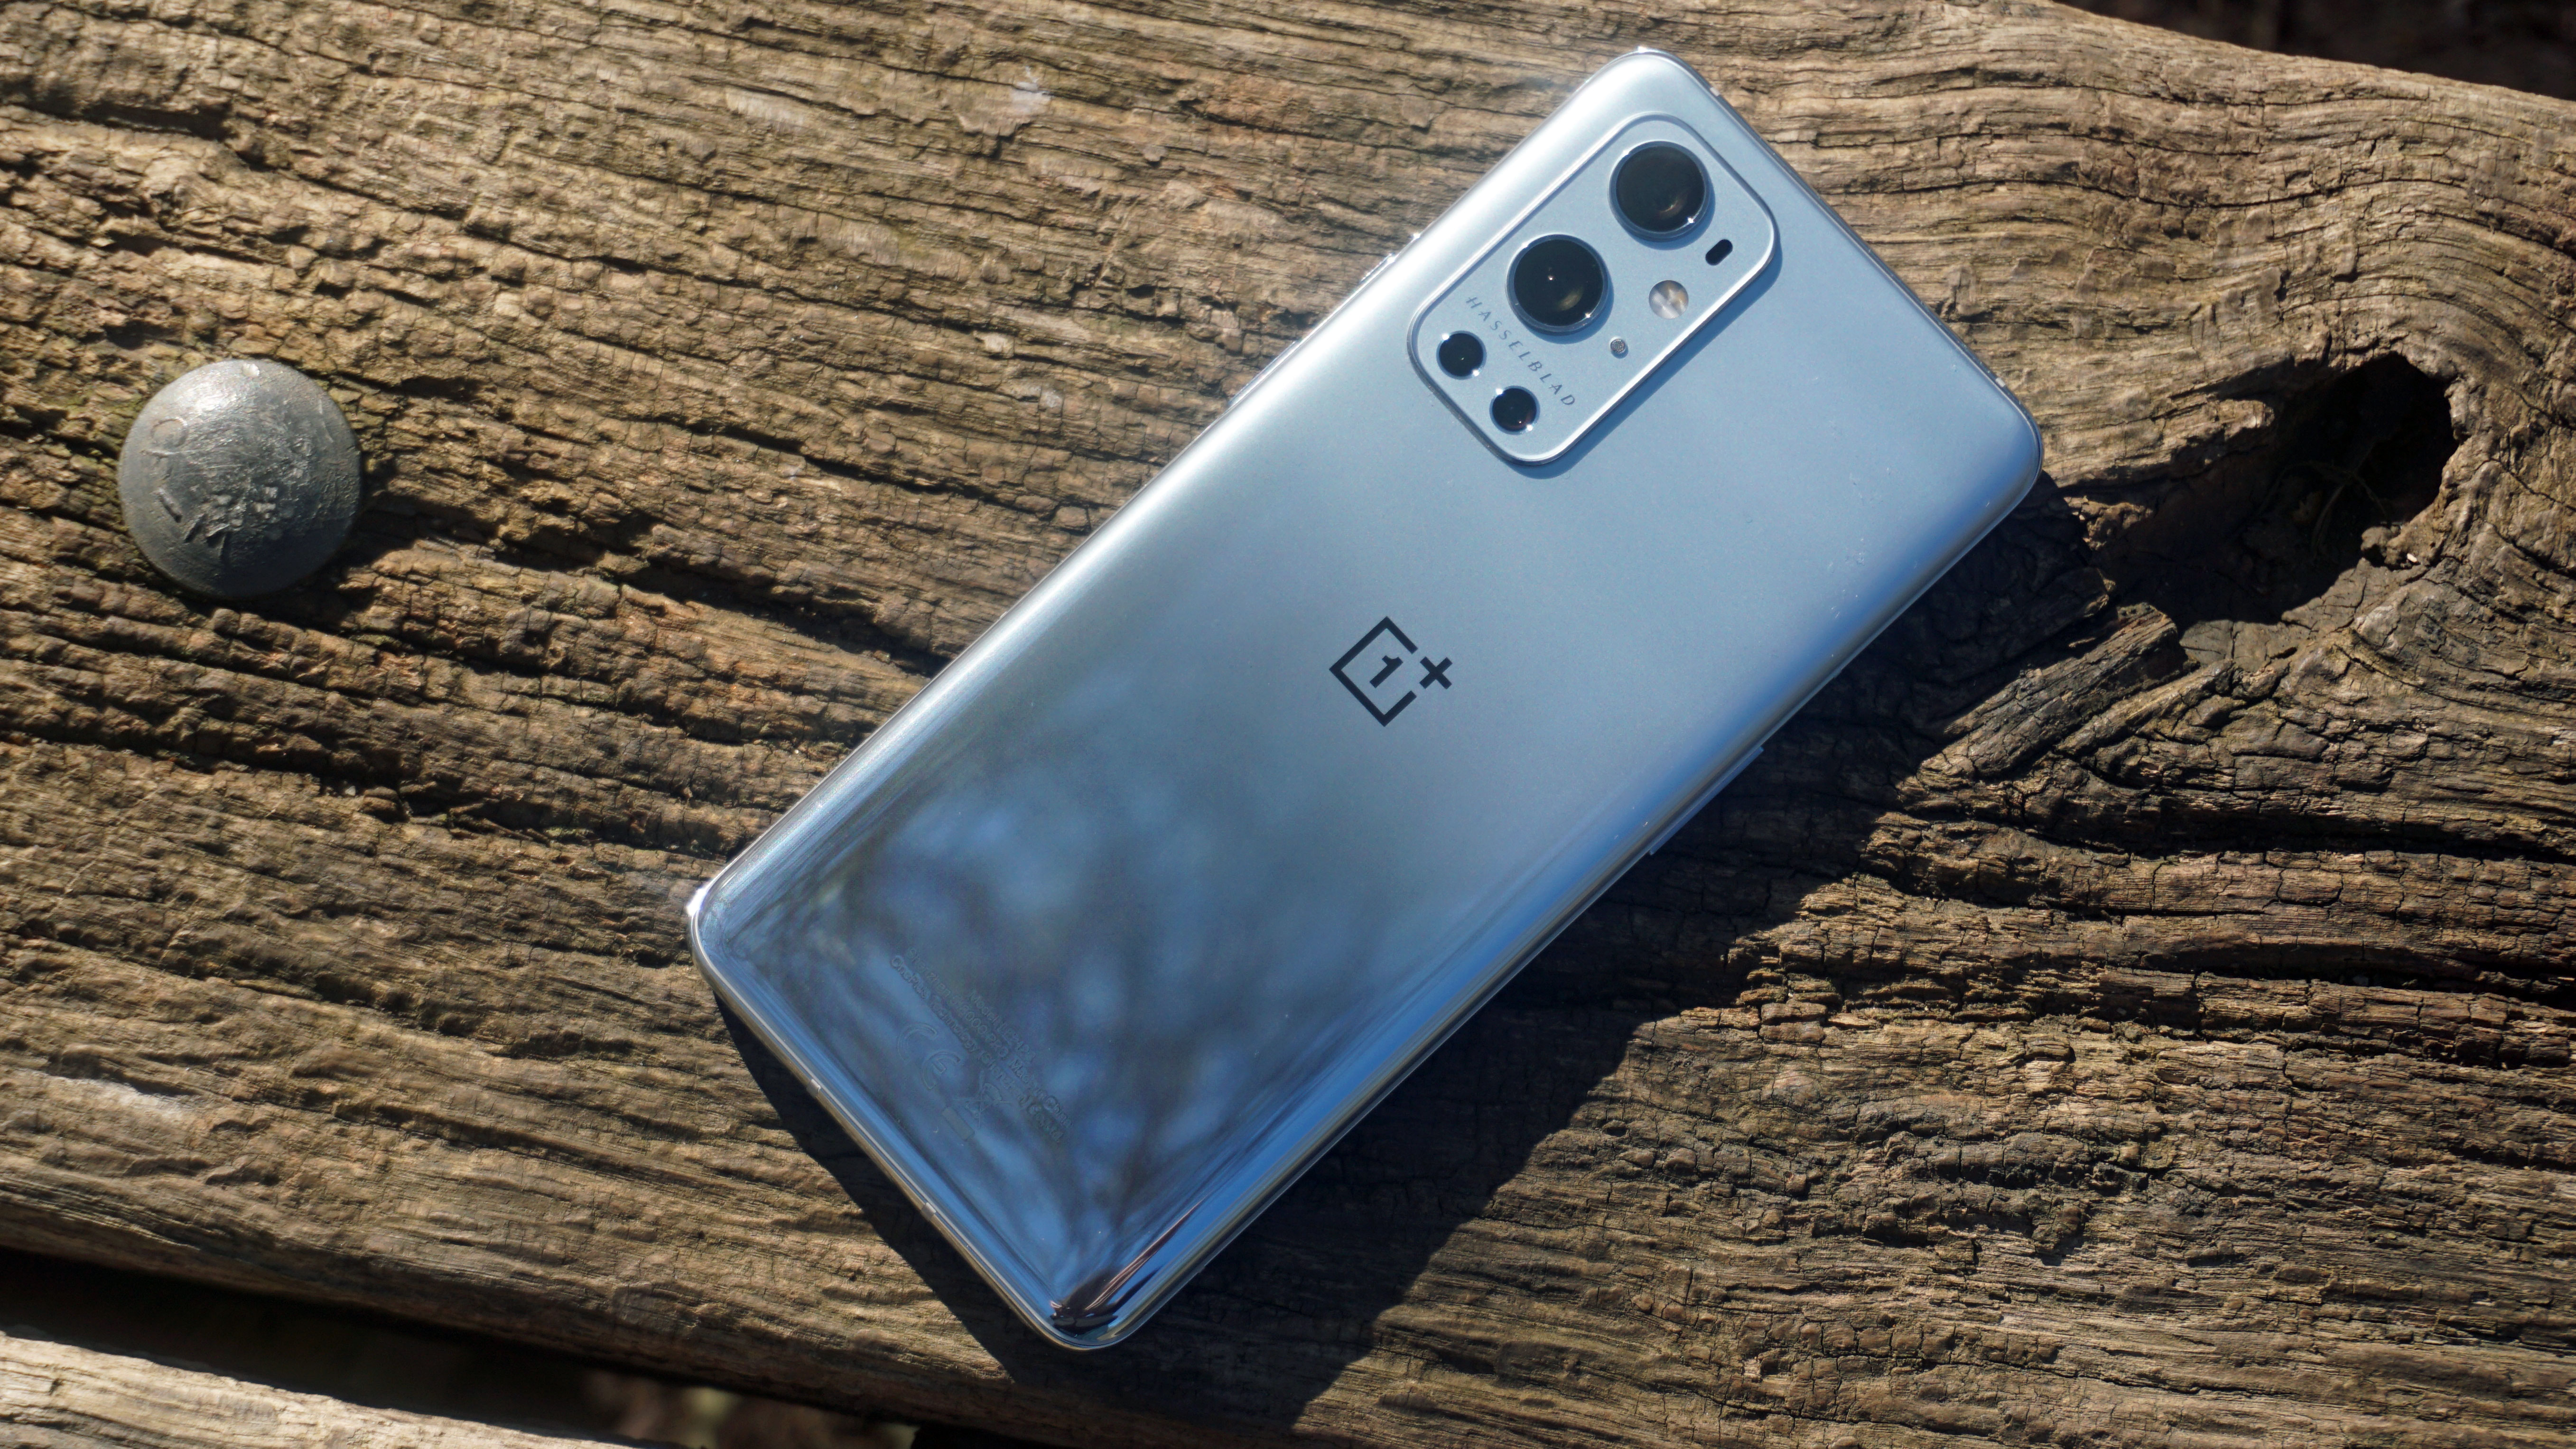 A OnePlus 9 Pro sat face down on a wooden surface